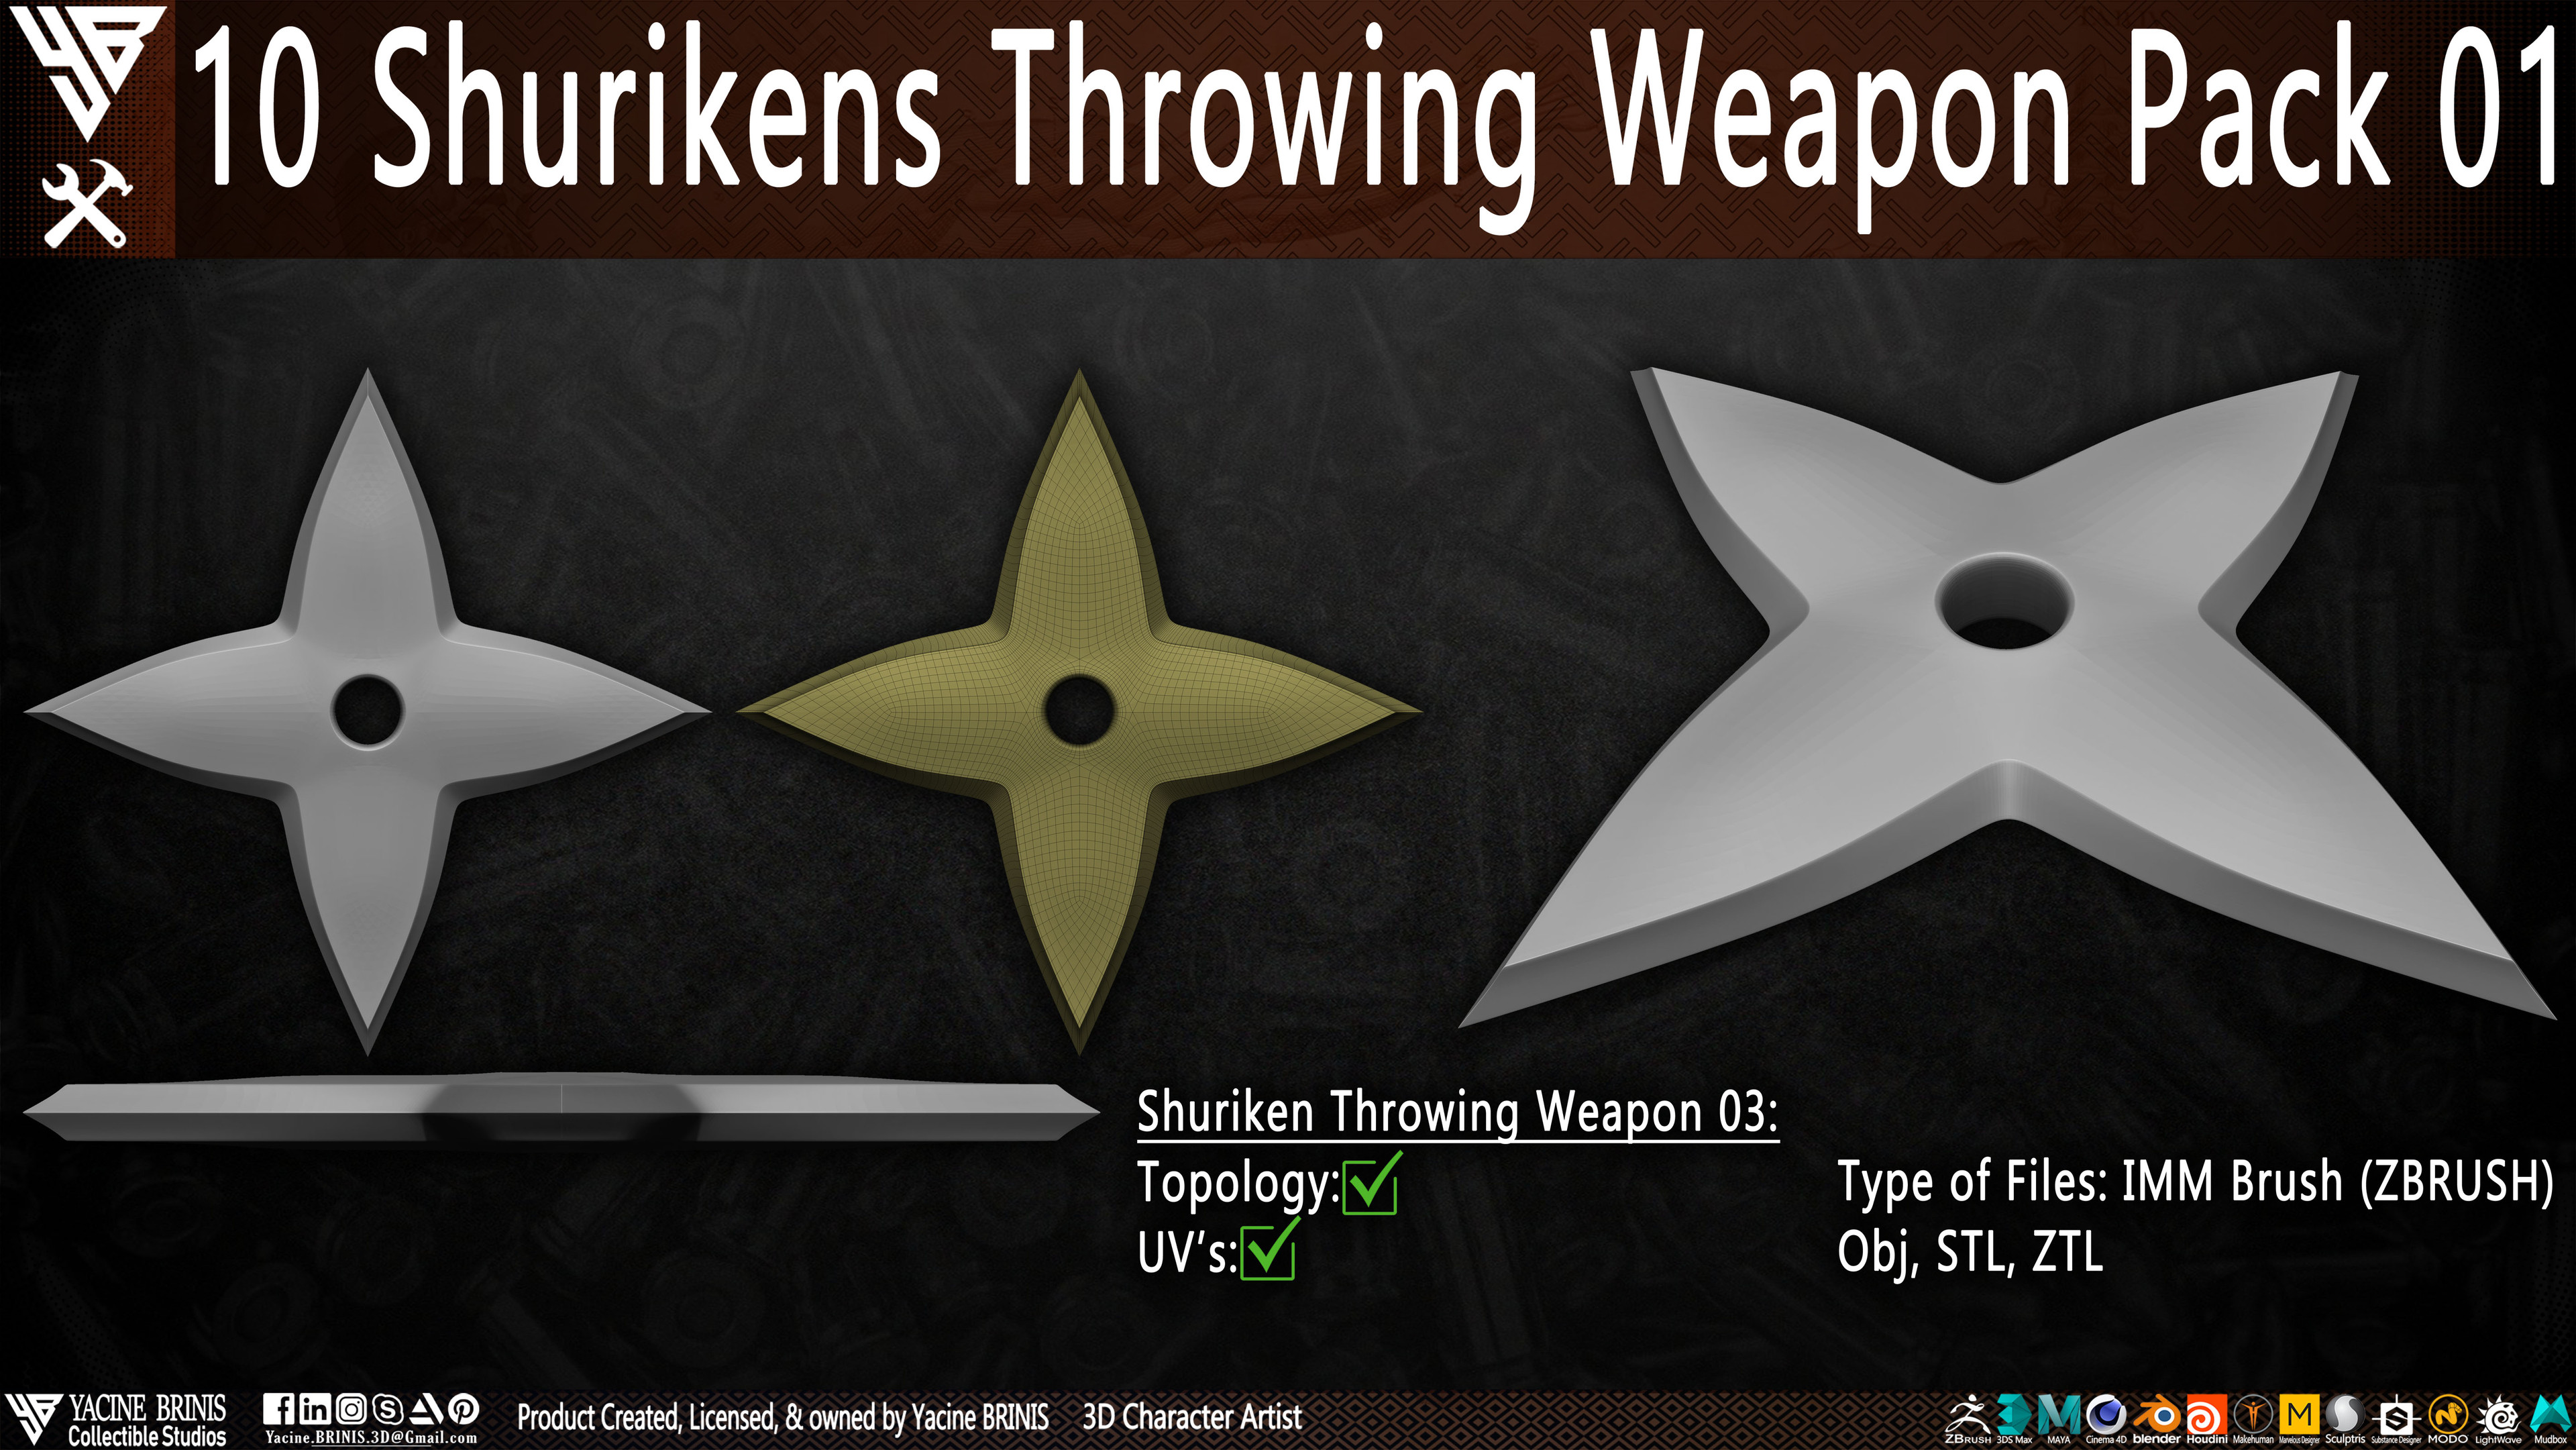 10 Shurikens Throwing Weapon Pack 01 sculpted by Yacine BRINIS Set 07